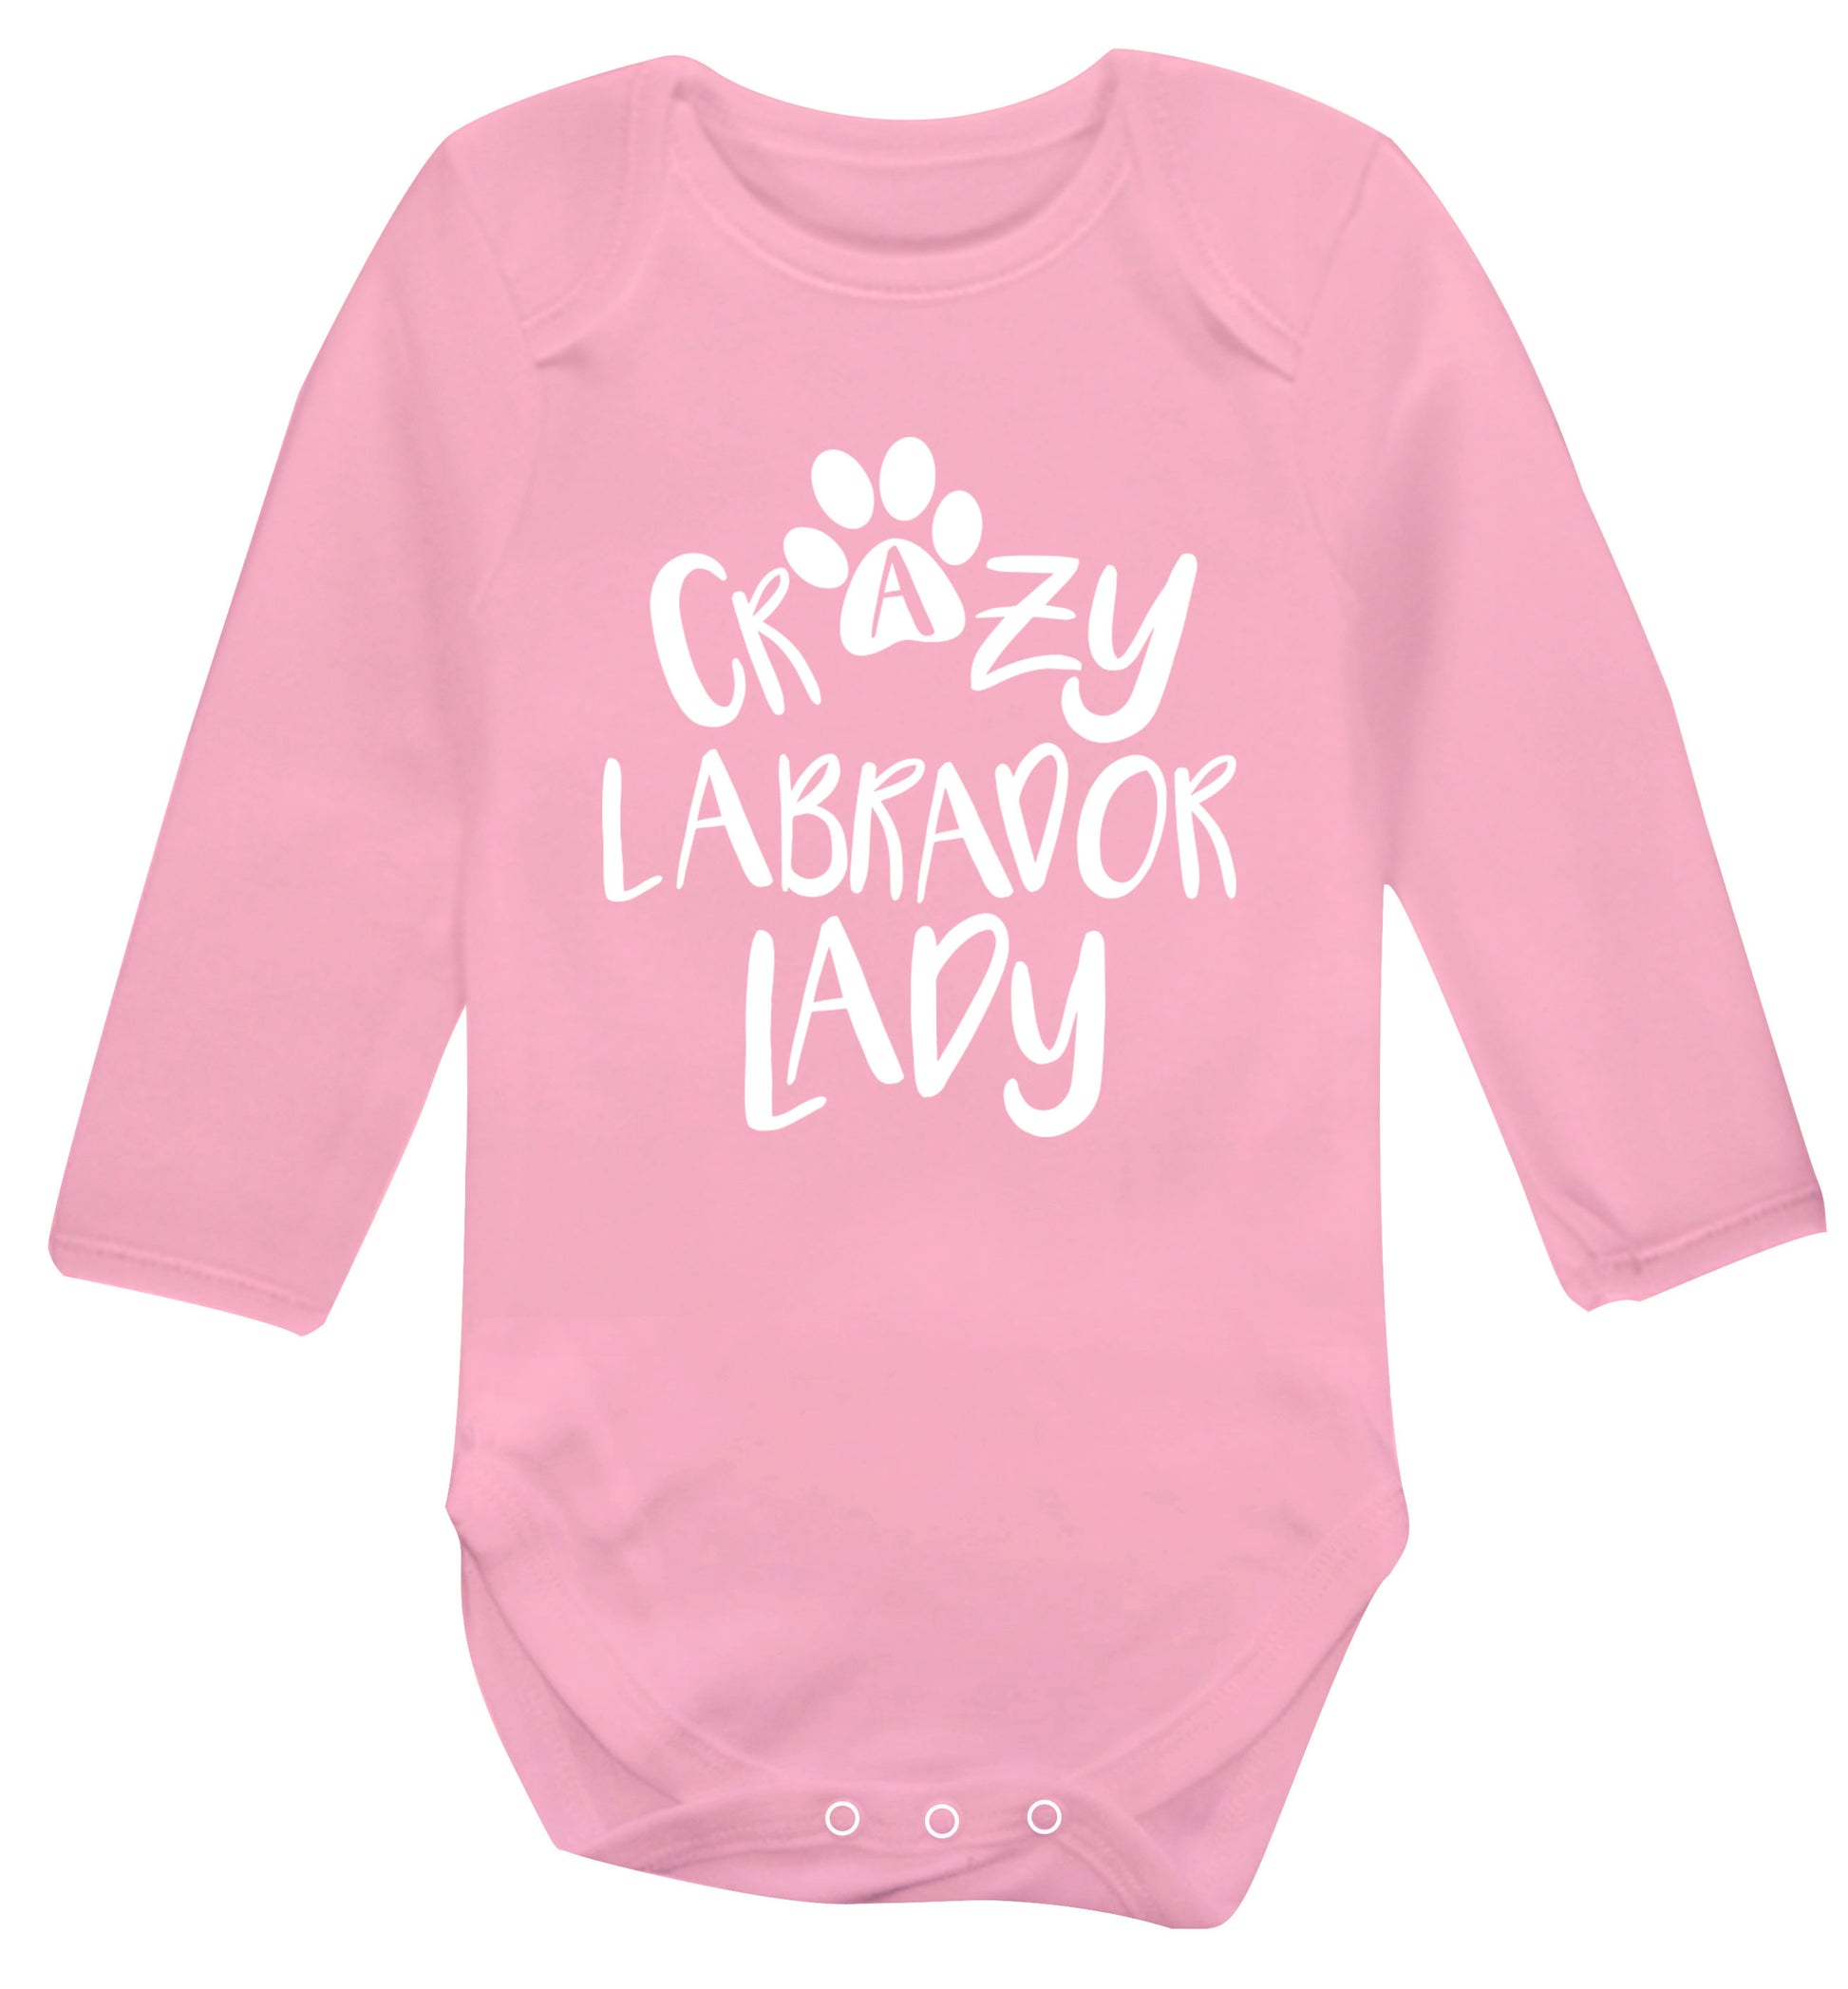 Crazy labrador lady Baby Vest long sleeved pale pink 6-12 months